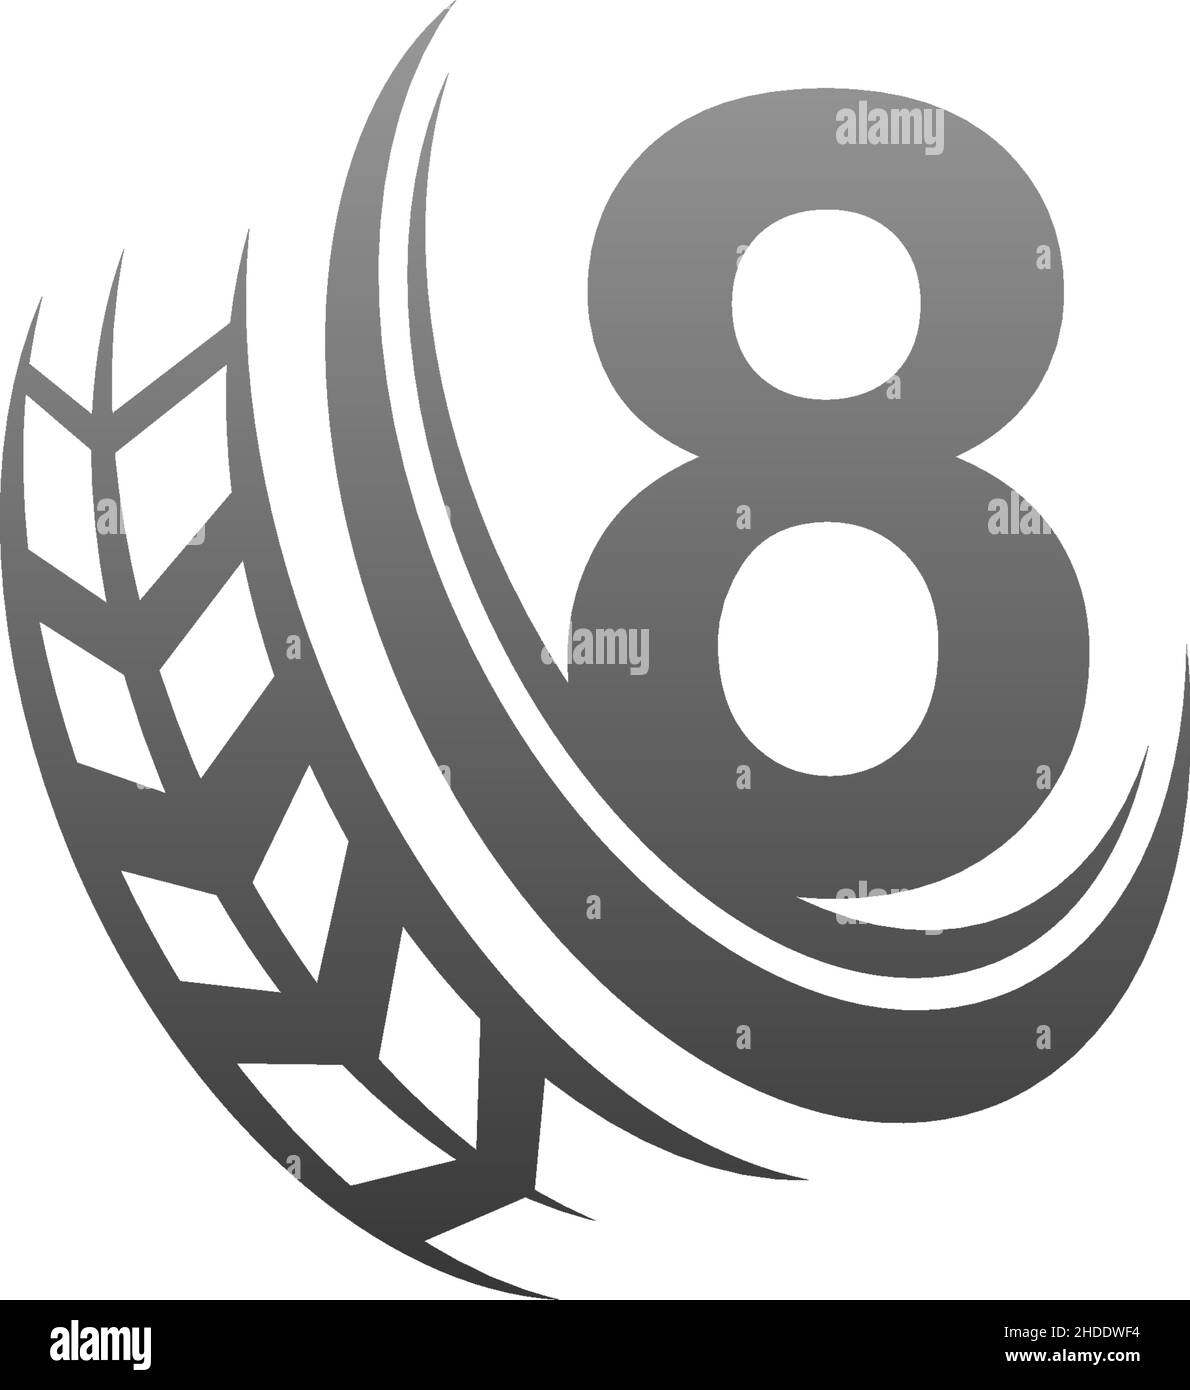 Number 8 with trailing wheel icon design template illustration vector Stock Vector